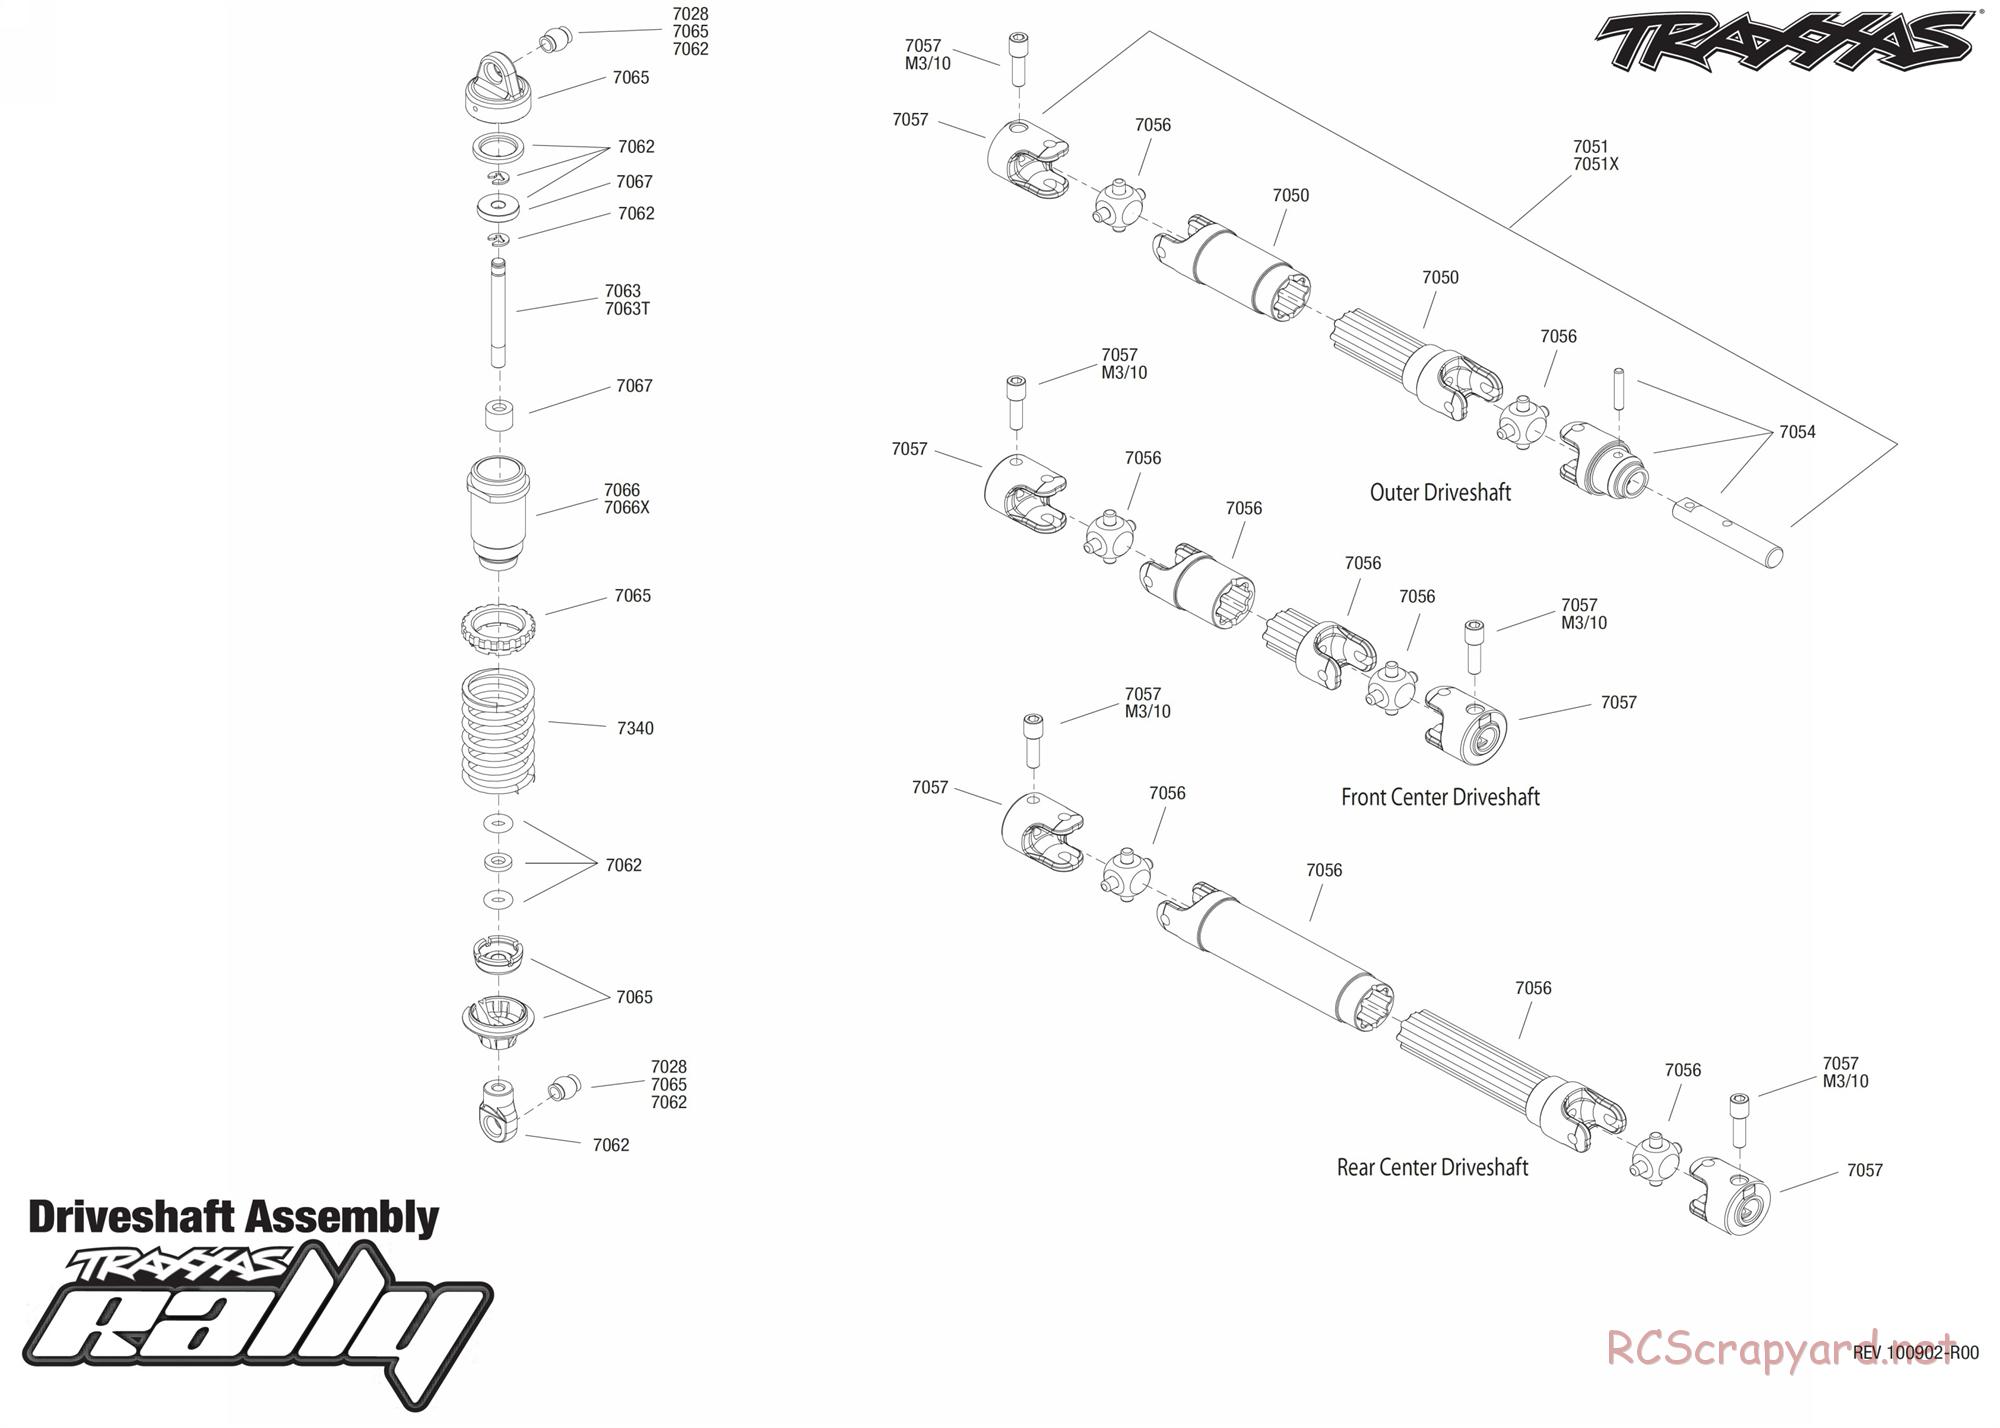 Traxxas - 1/16 Rally VXL (2010) - Exploded Views - Page 2